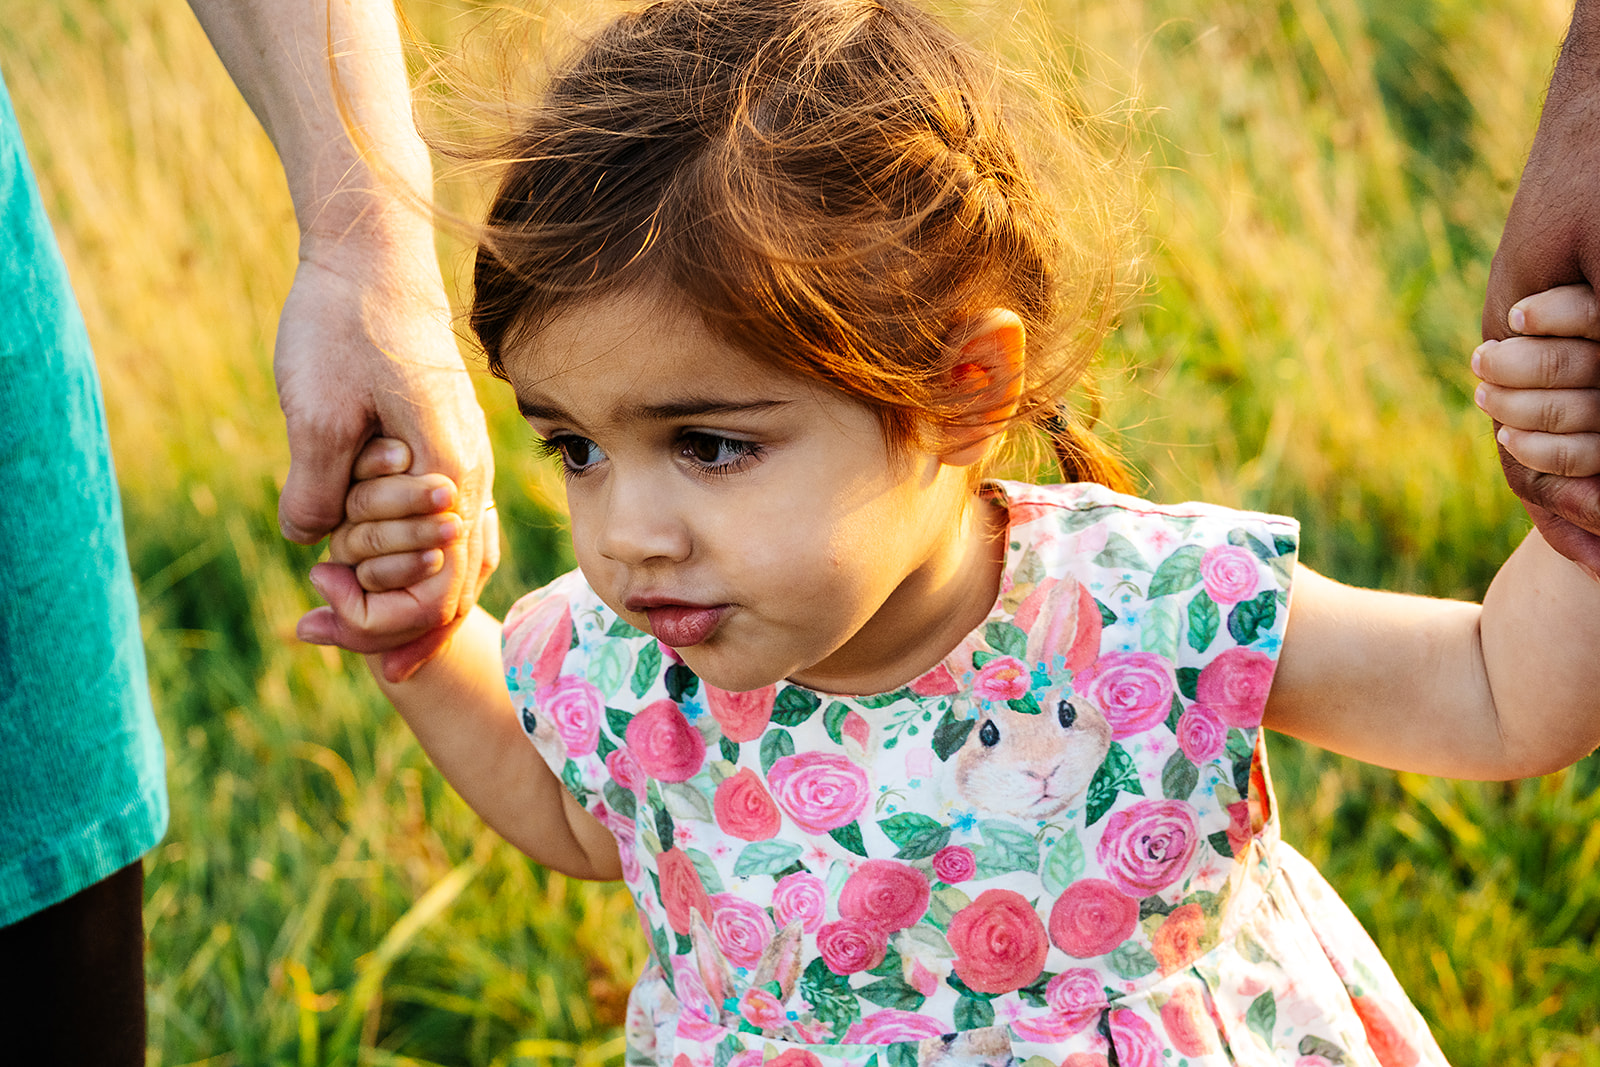 Daughter holding her parents hands as she walks through a field